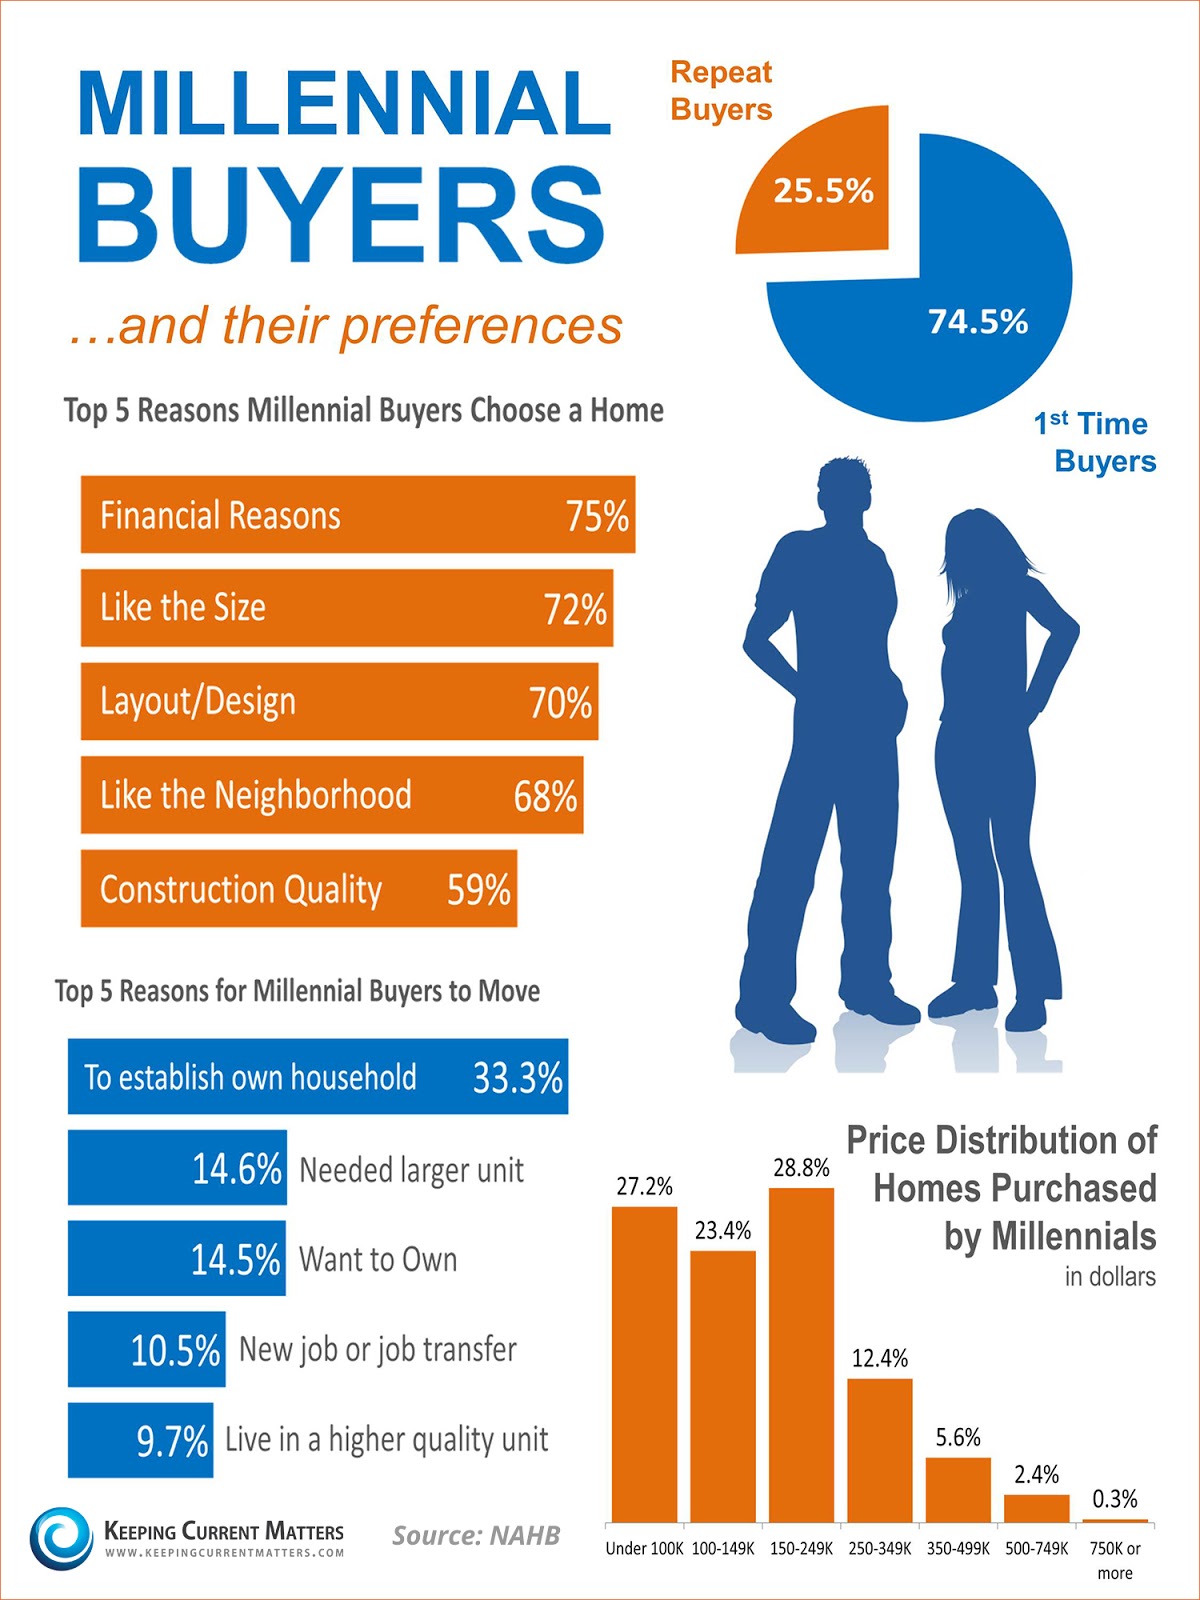 What are some tips for new home buyers?